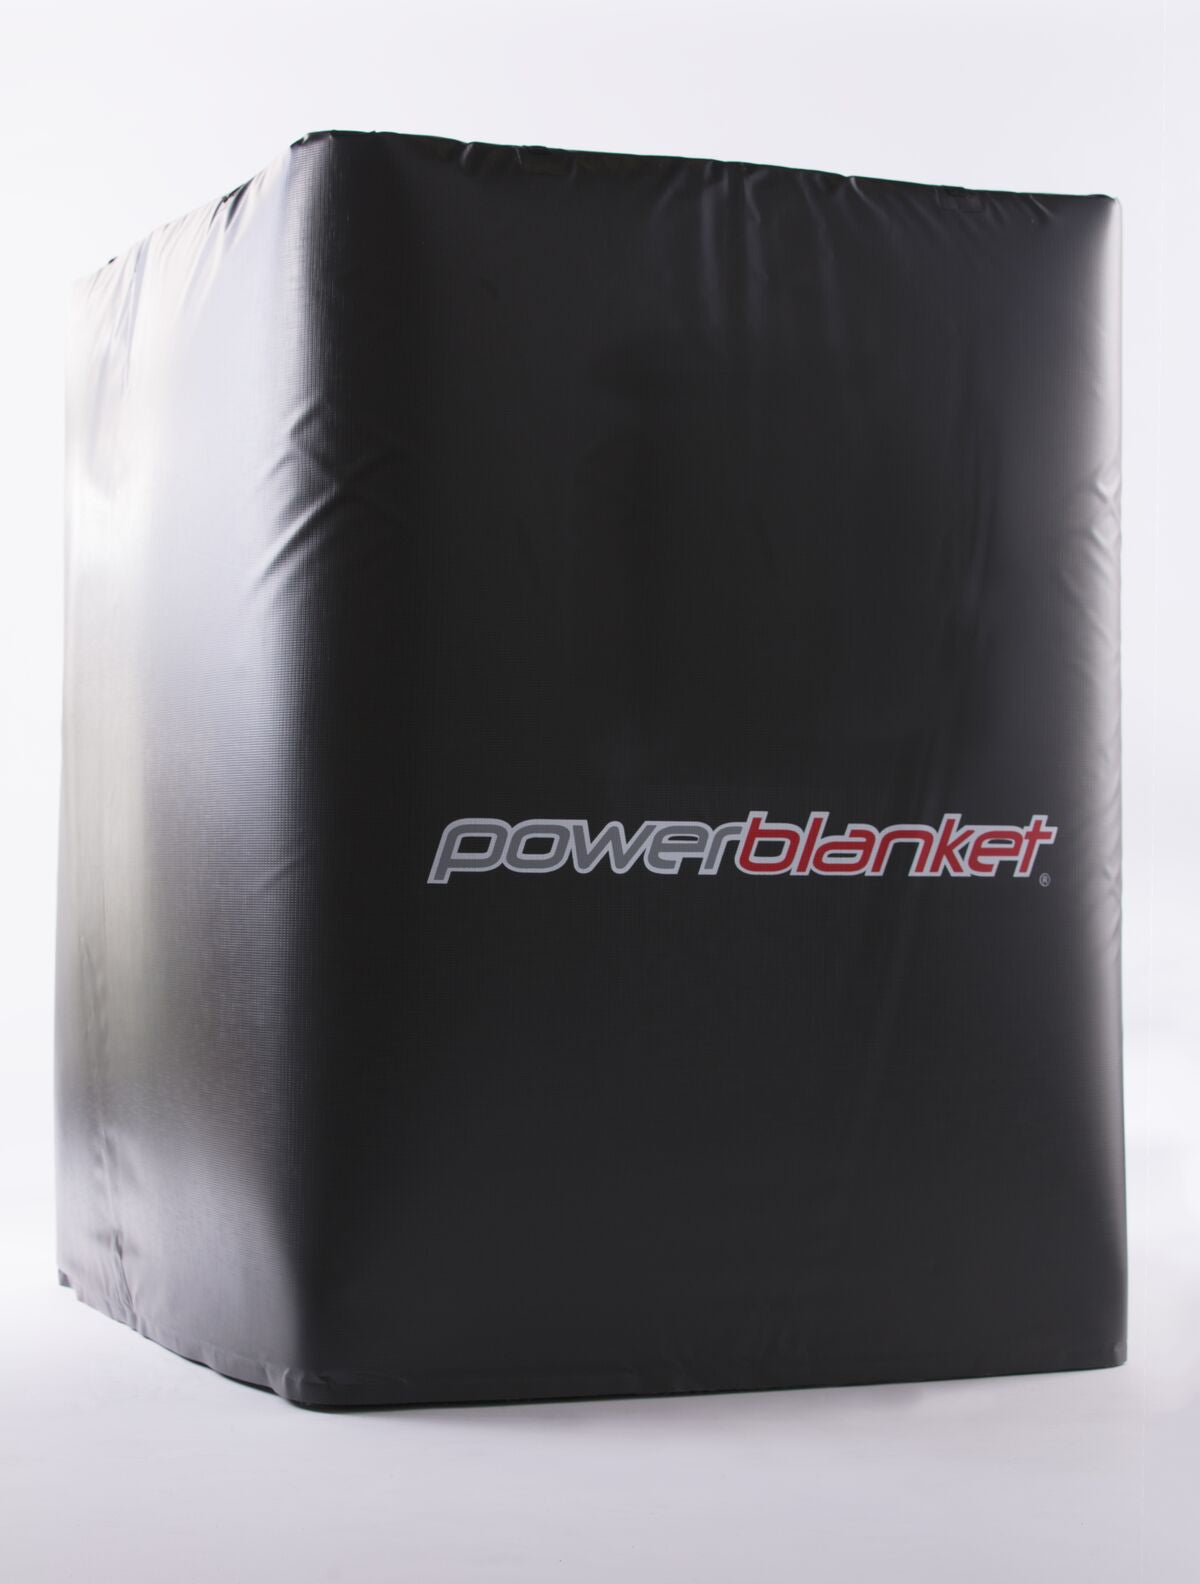 Powerblanket TH550-240V Tote Heater from HeatAuthority.com